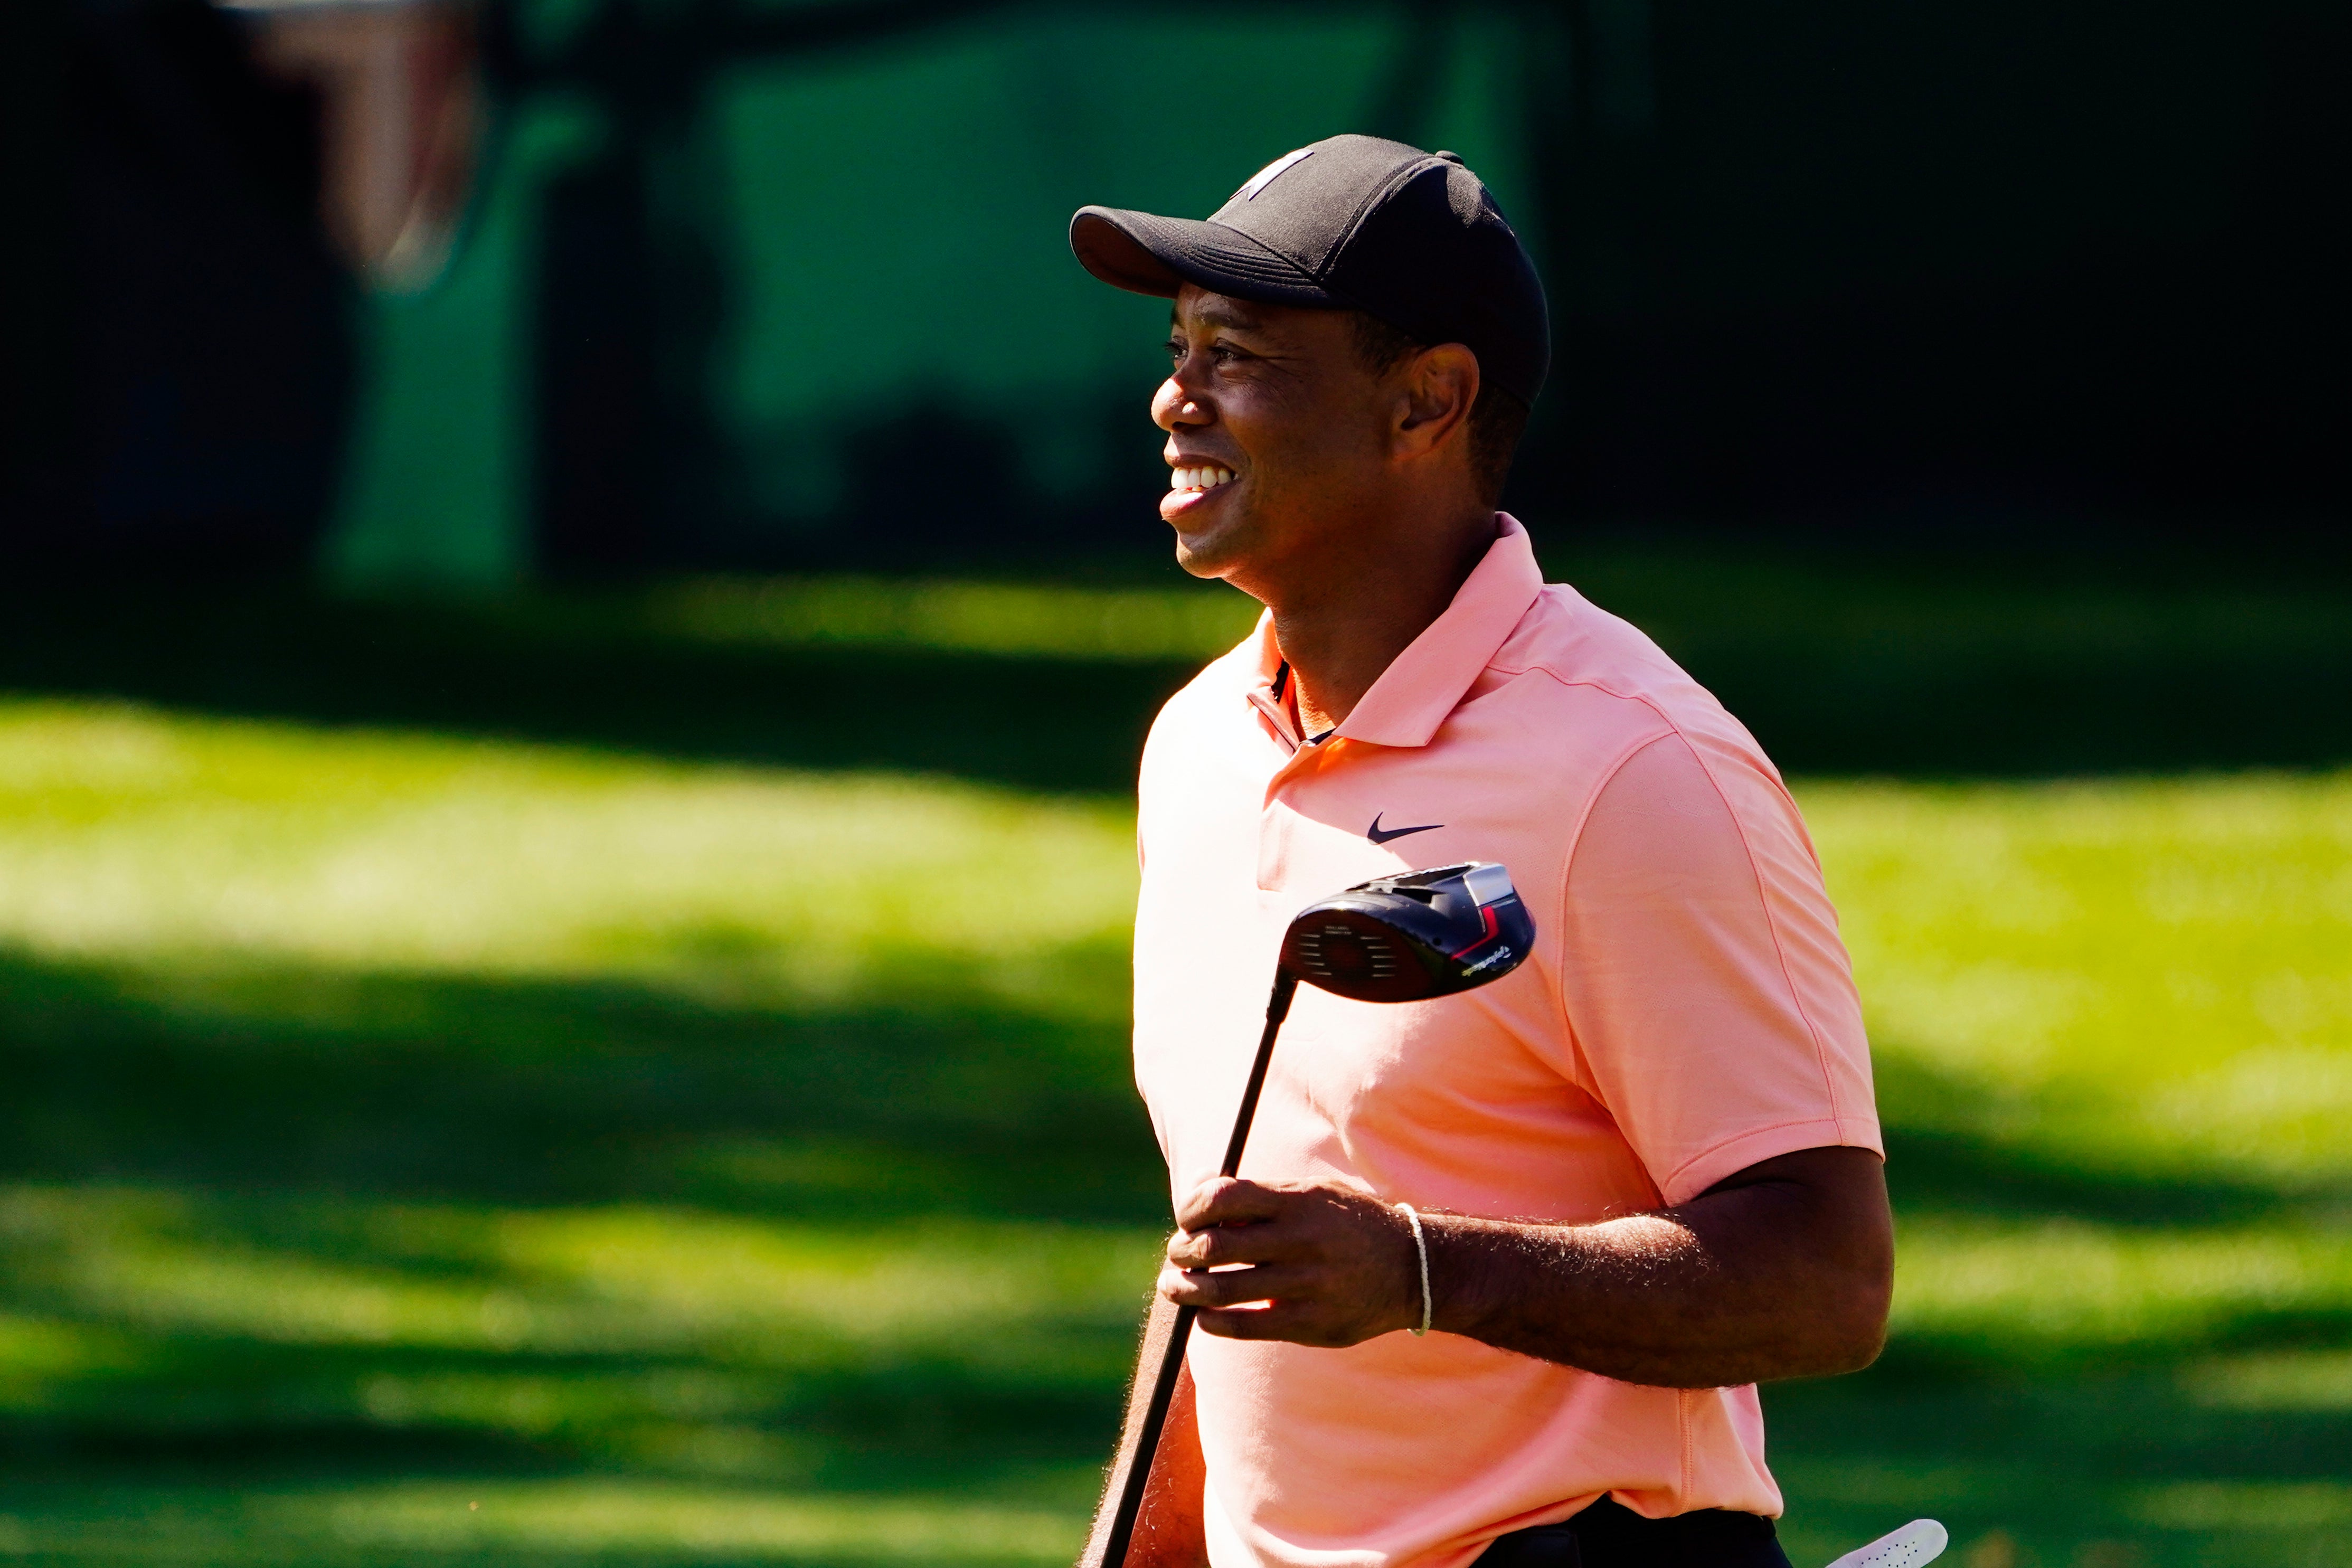 Tiger Woods looks likely to make his comeback at the Masters (Matt Slocum/AP).